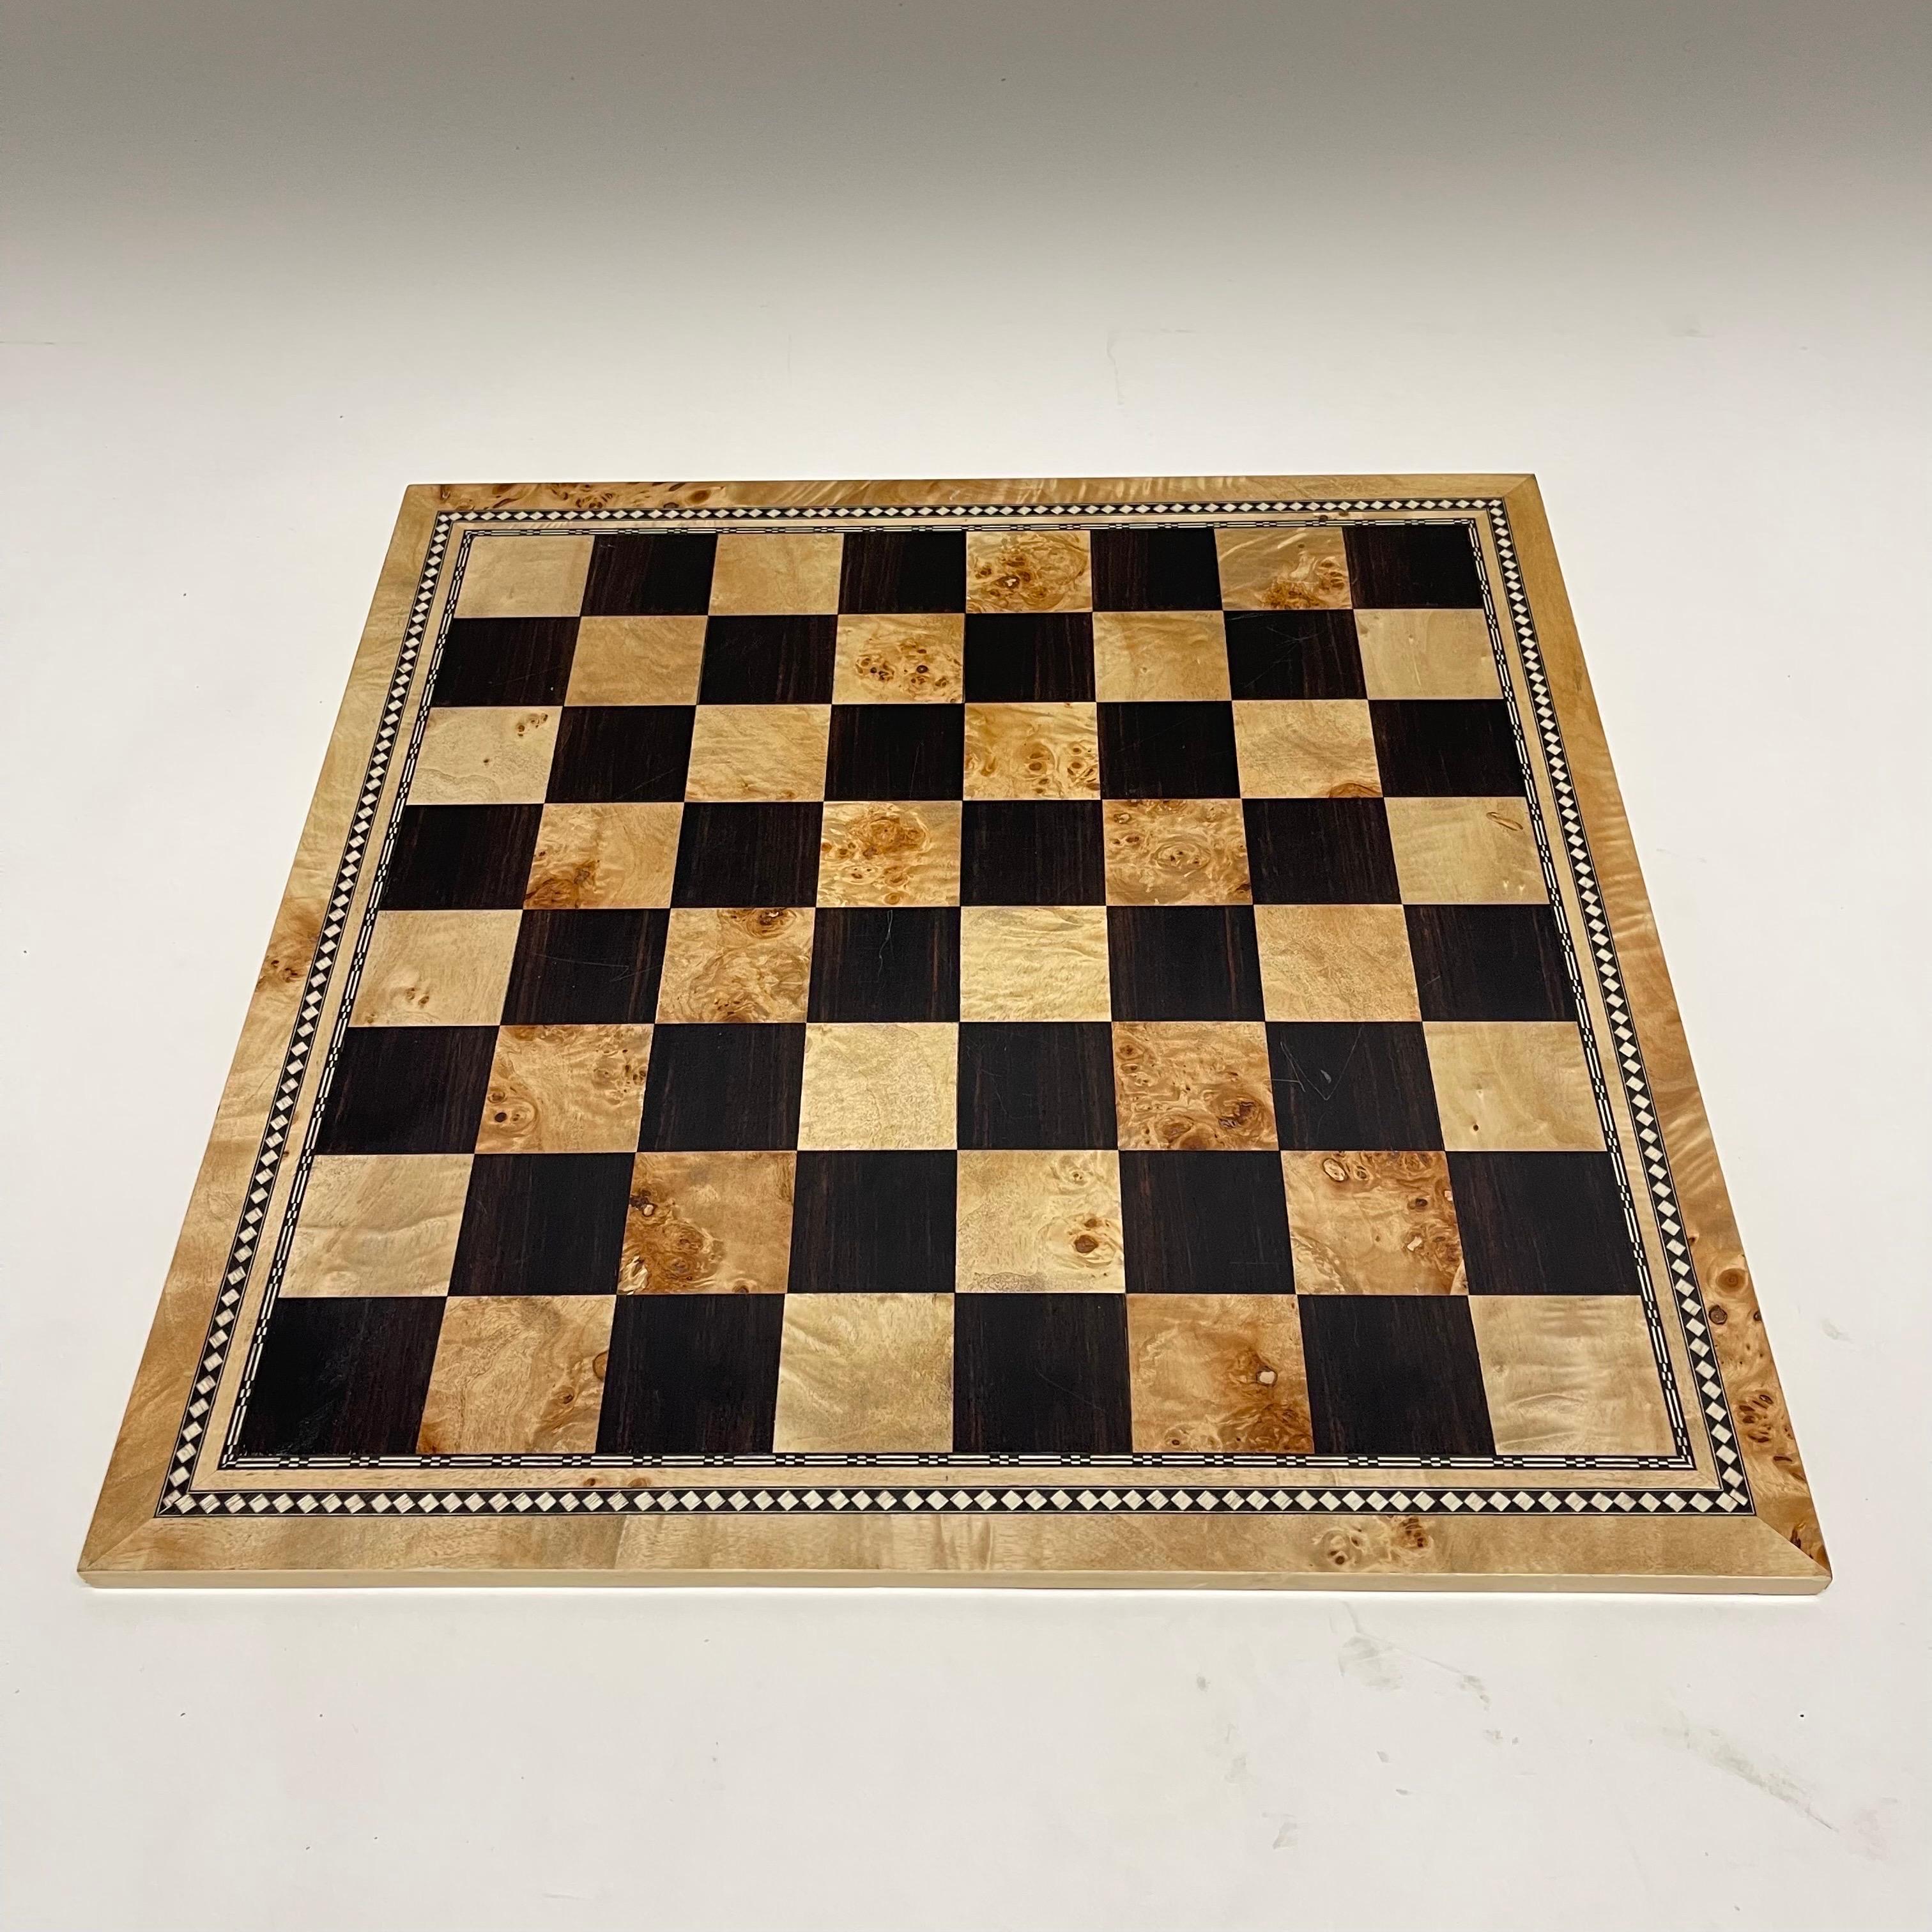 Post-Modern Japanese chessboard or checkerboard. Rendered in an intricate inlay marquetry of walnut, burl, birch, and maple. By Tomokazu, Japan, circa 1980s.